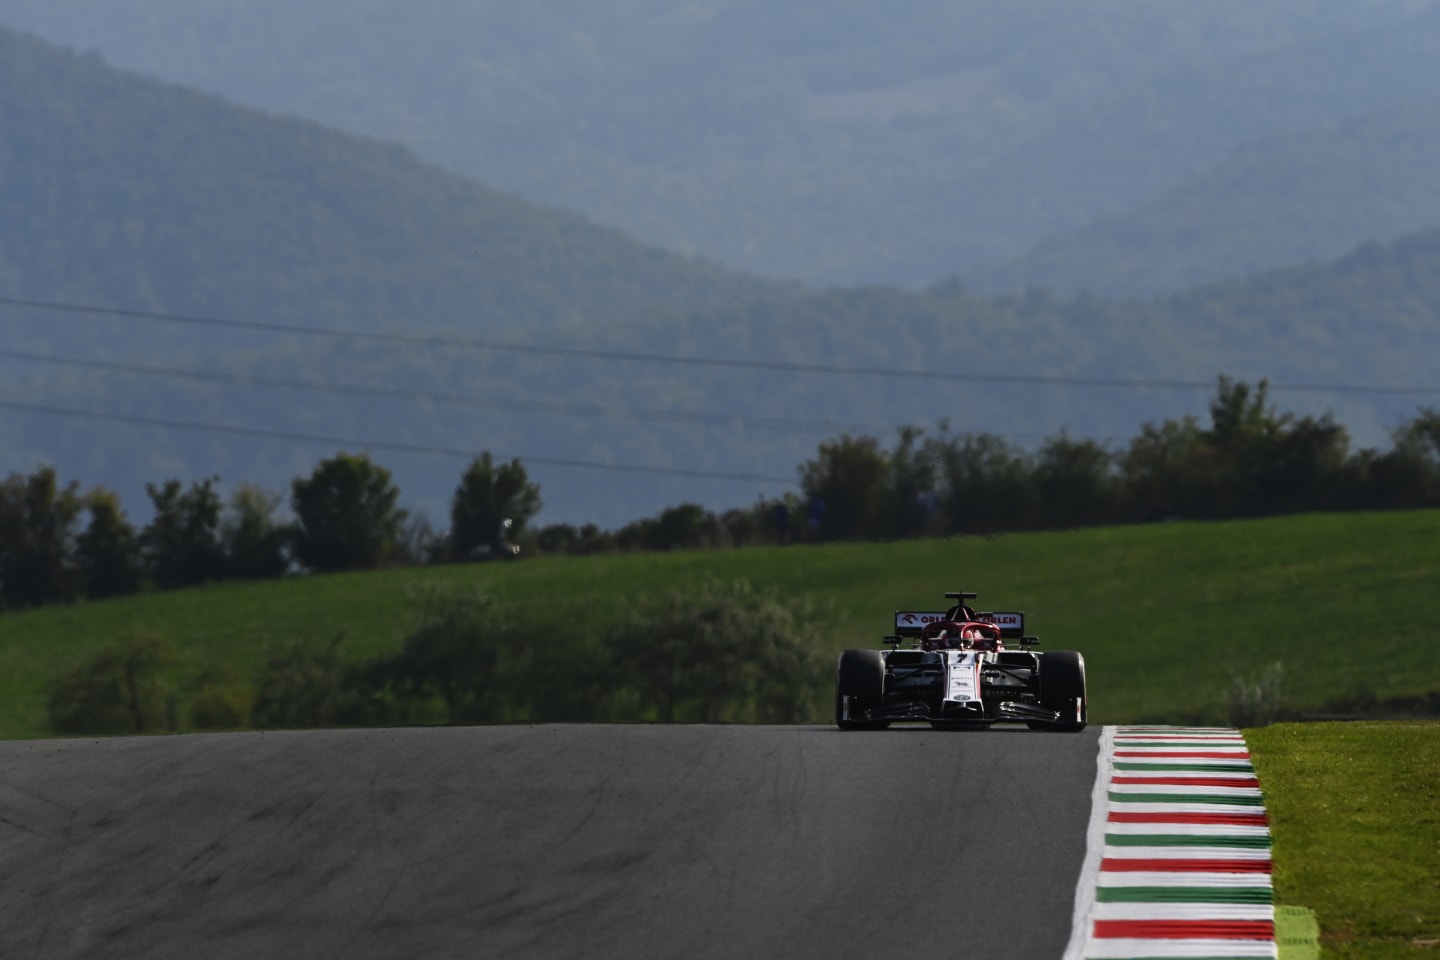 SCARPERIA, ITALY - SEPTEMBER 11: Kimi Raikkonen of Finland driving the (7) Alfa Romeo Racing C39 Ferrari on track during practice ahead of the F1 Grand Prix of Tuscany at Mugello Circuit on September 11, 2020 in Scarperia, Italy. (Photo by Rudy Carezzevoli/Getty Images)